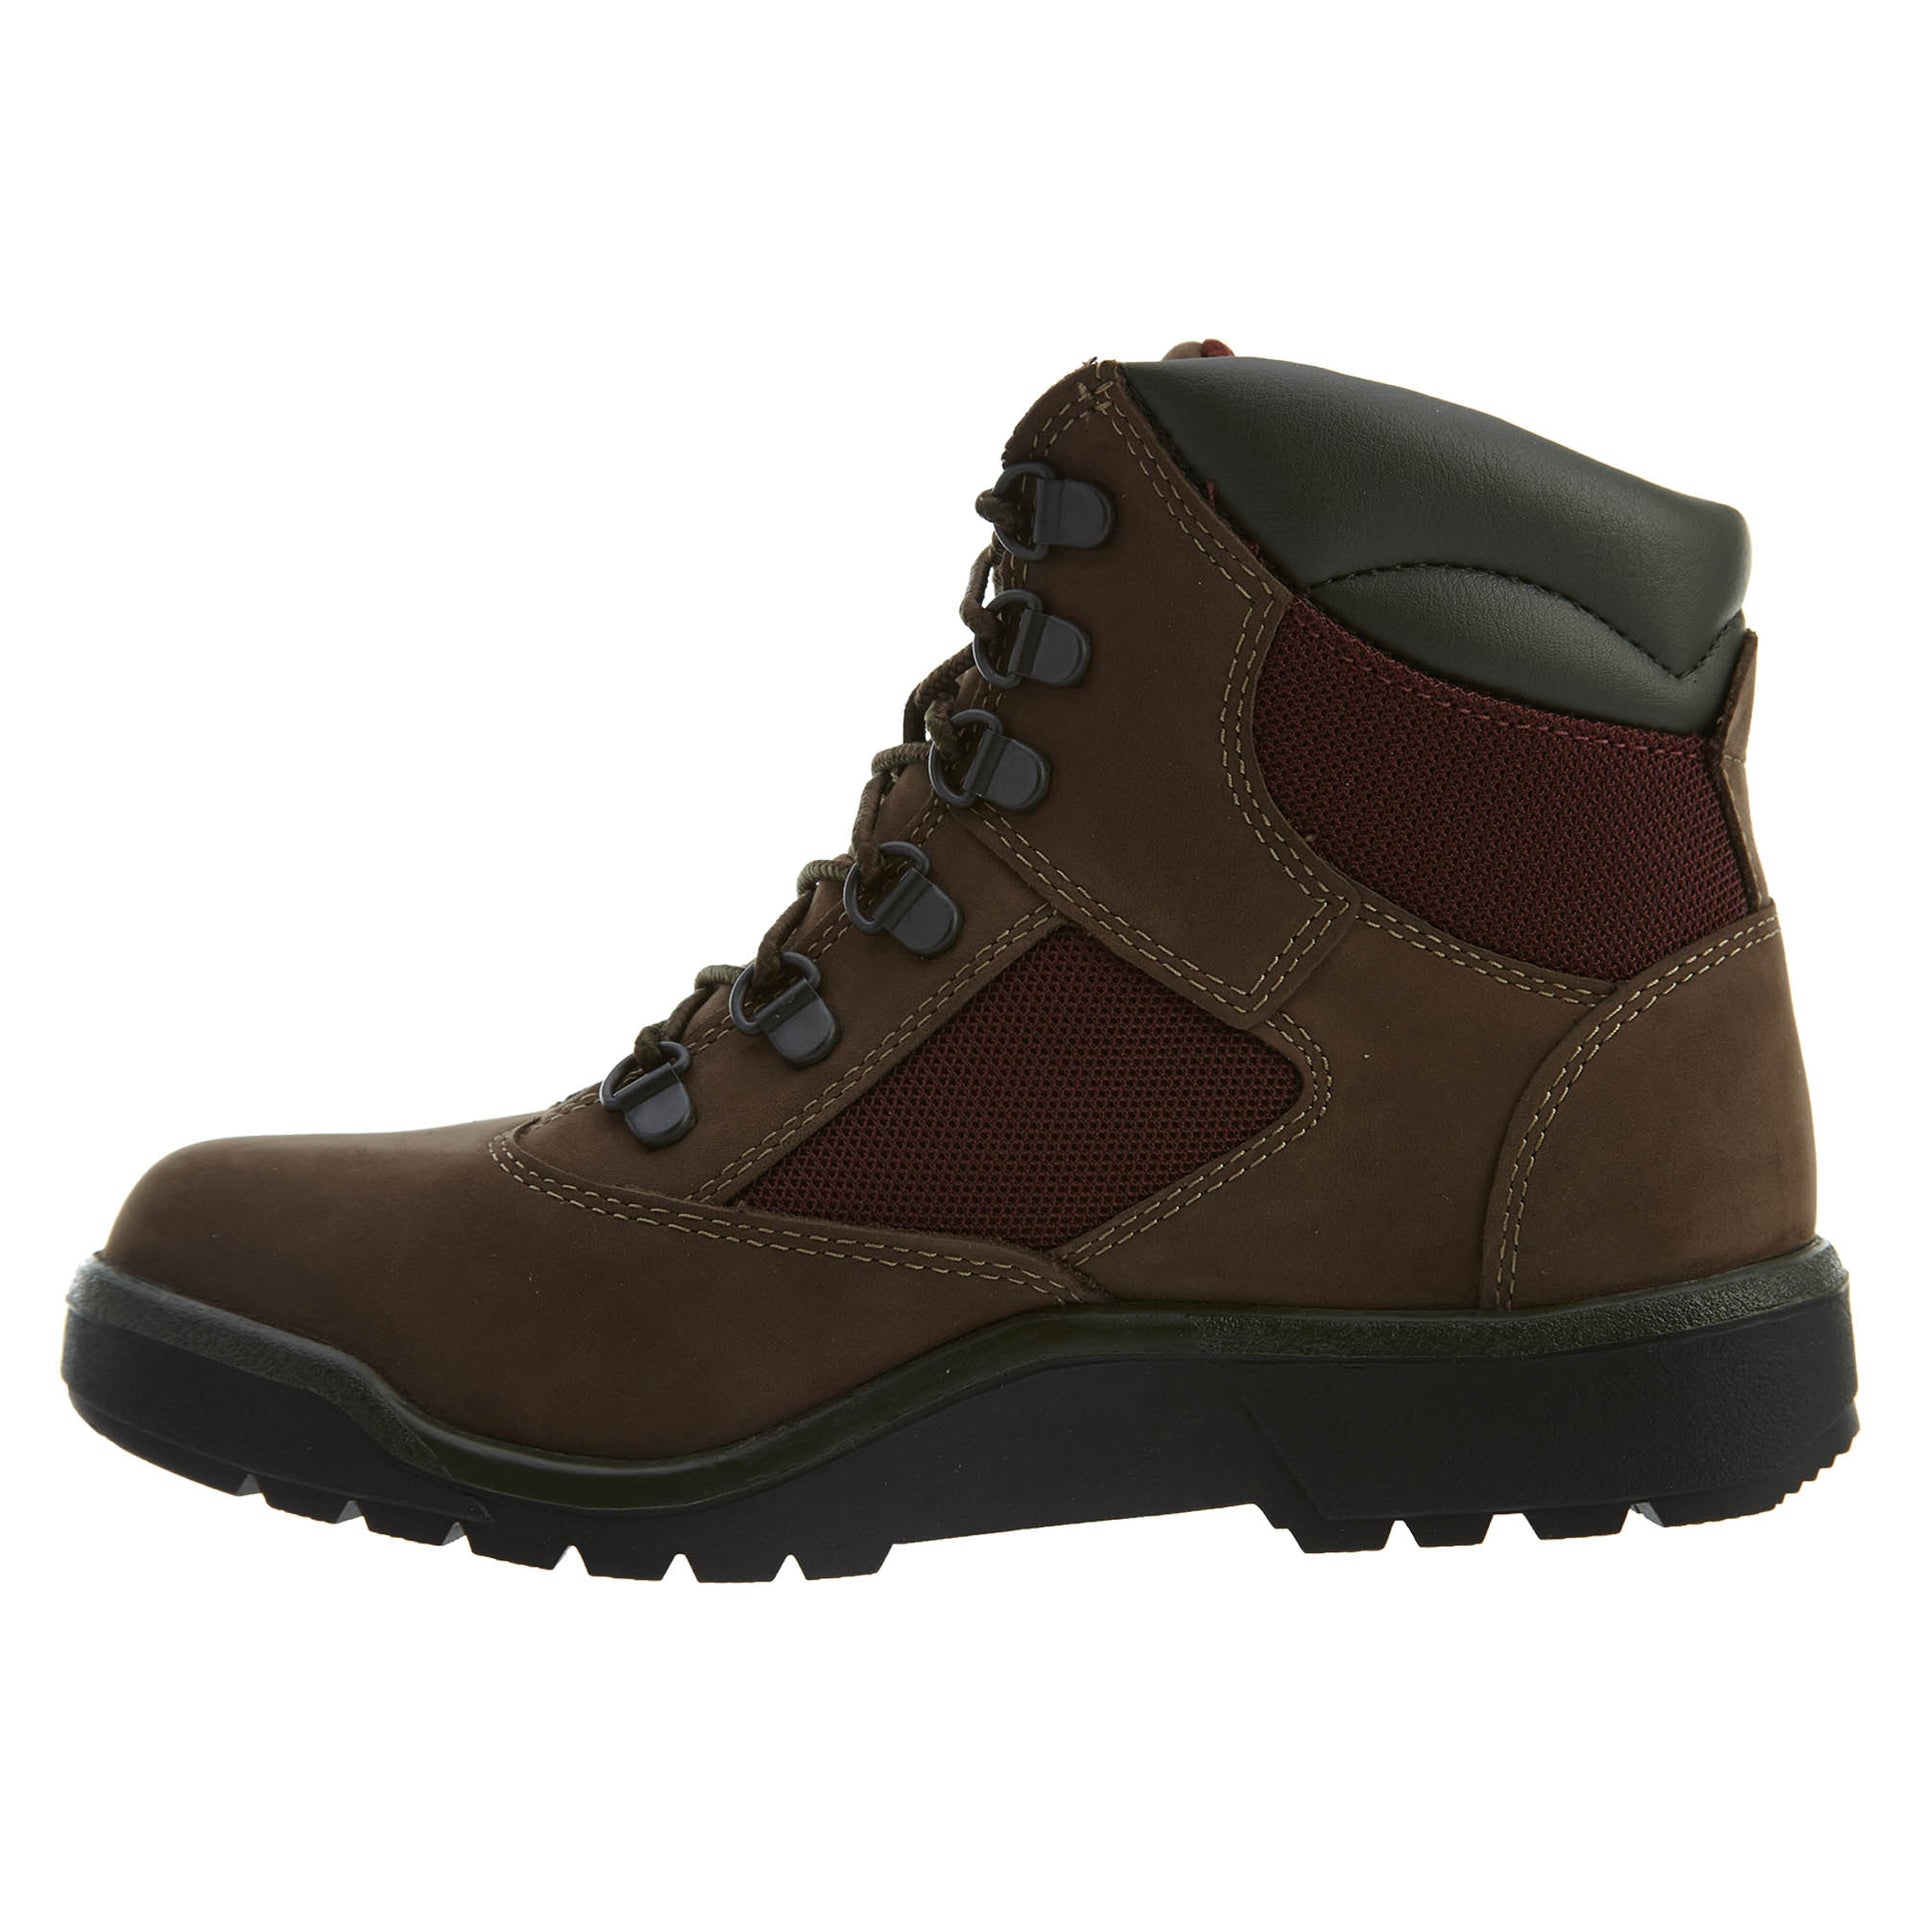 Timberland 6" Field Boots Big Kids Style : Tb0a1y4w-D40